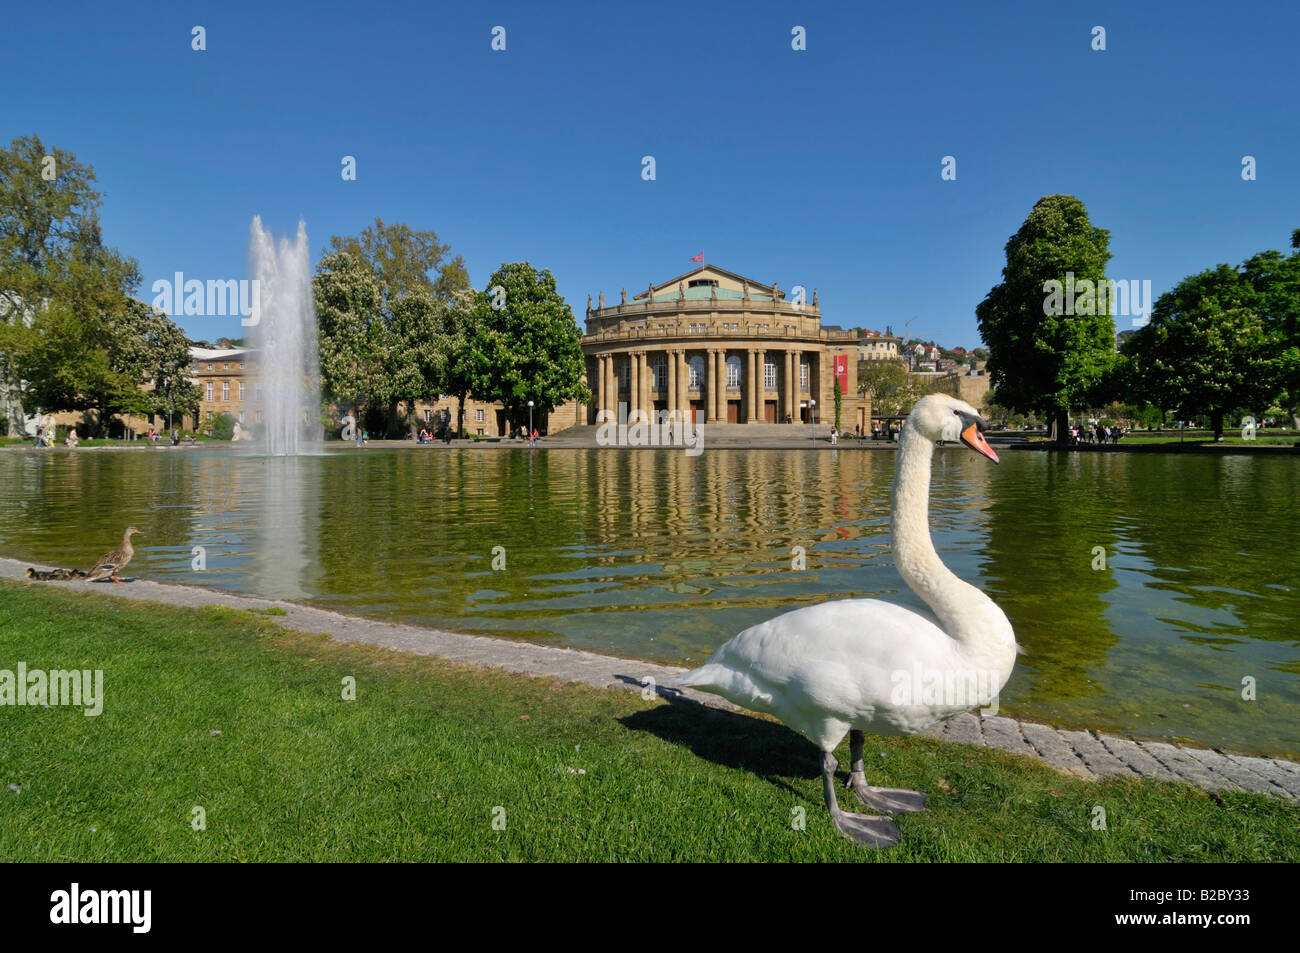 Swan debout devant le lac Eckensee et le Staatstheater, State Theatre, Stuttgart, Bade-Wurtemberg, Allemagne, Europe Banque D'Images